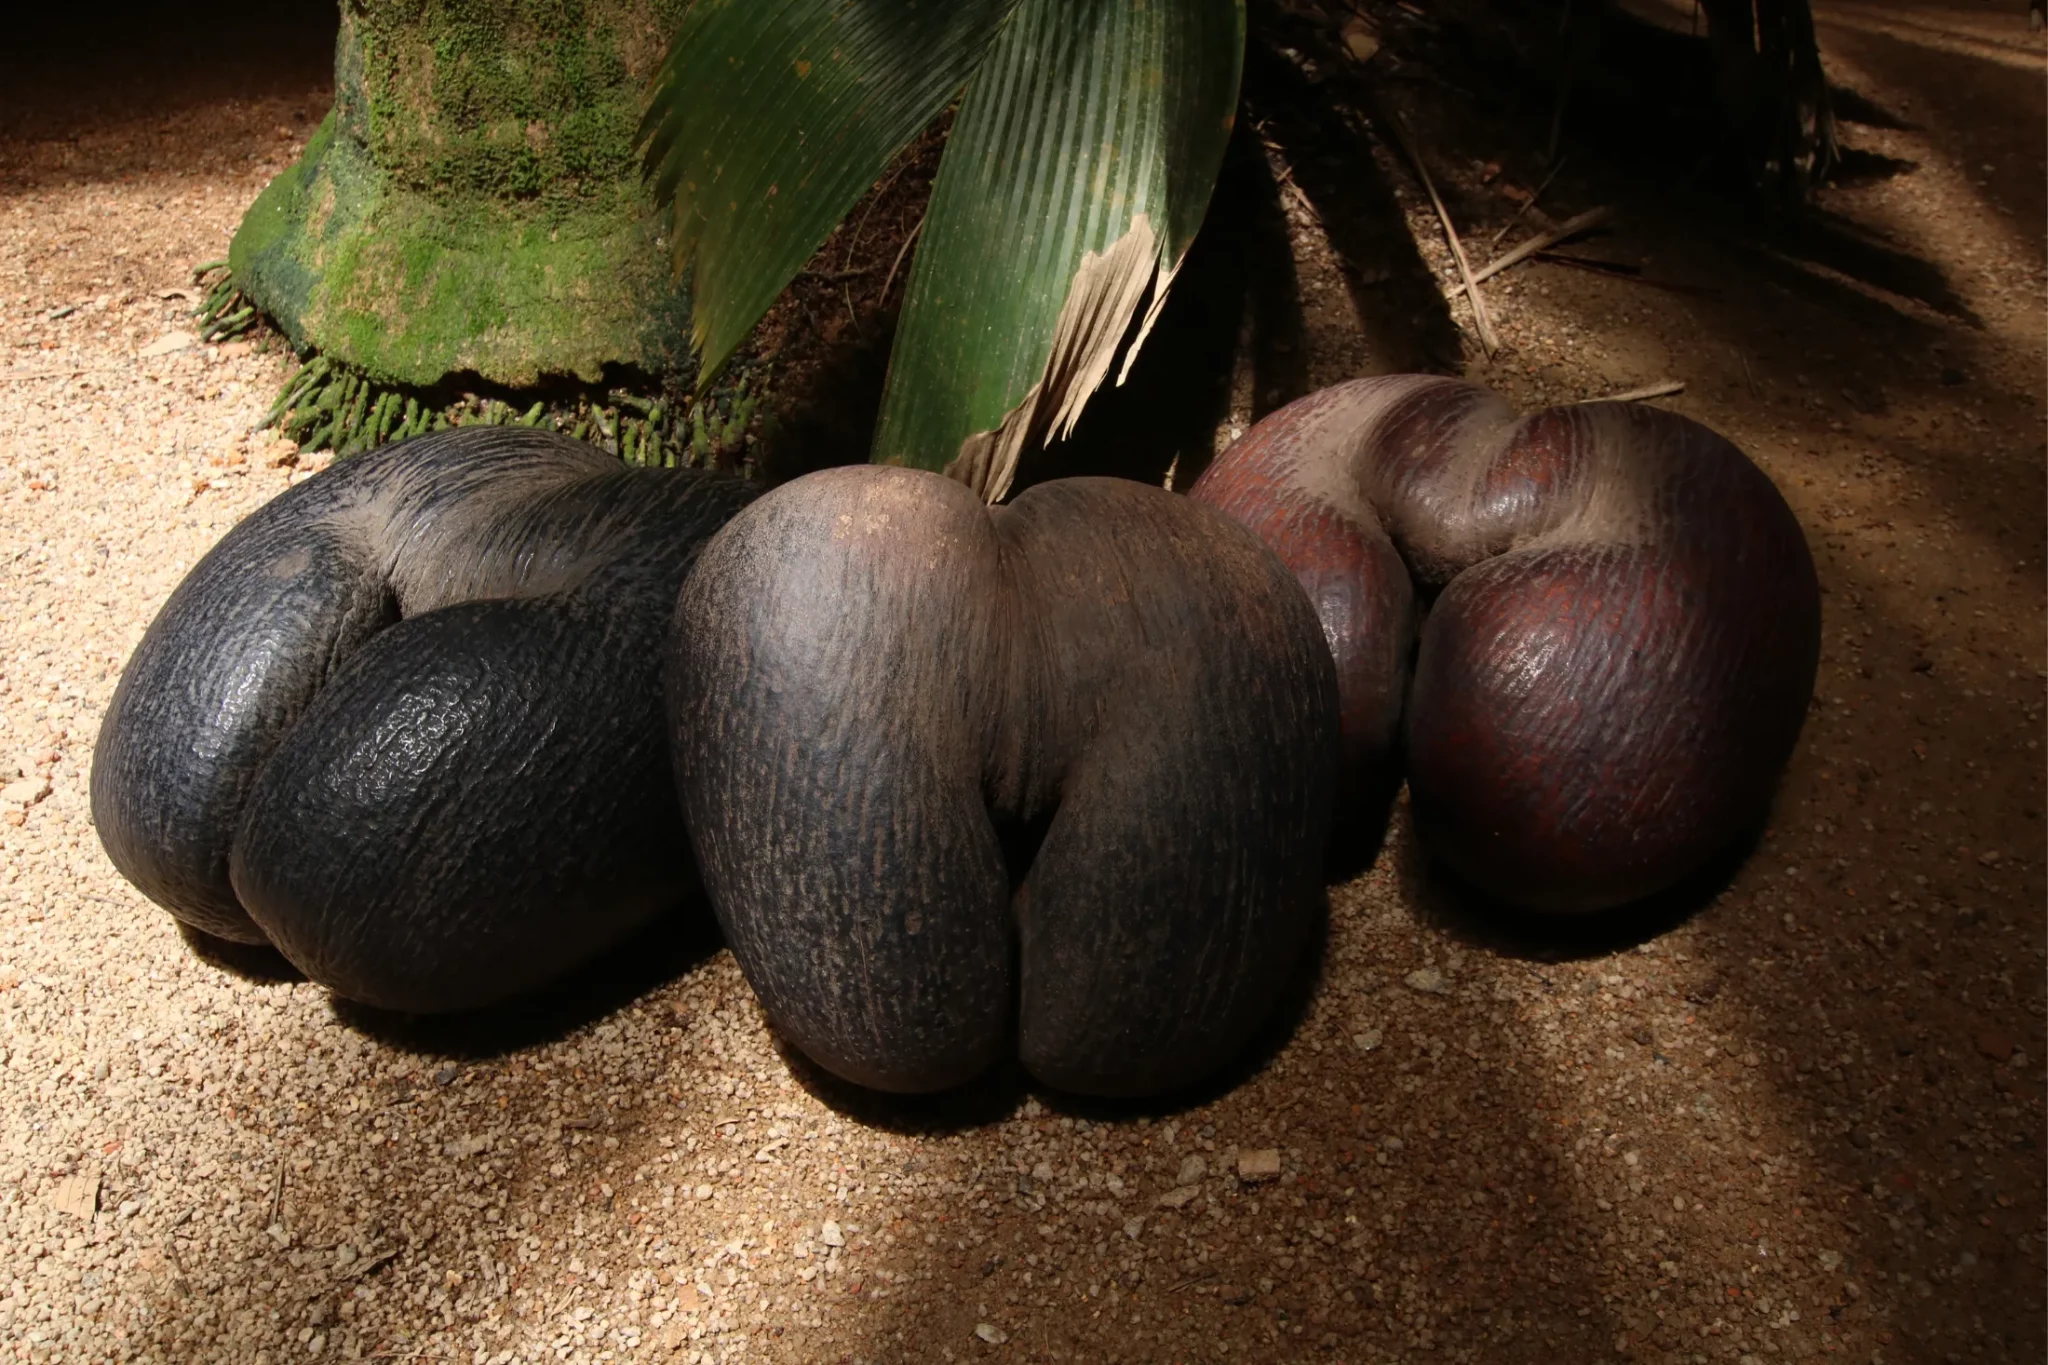 Coco de mer is a double coconut, endemic to the islands of Praslin and Curieuse.